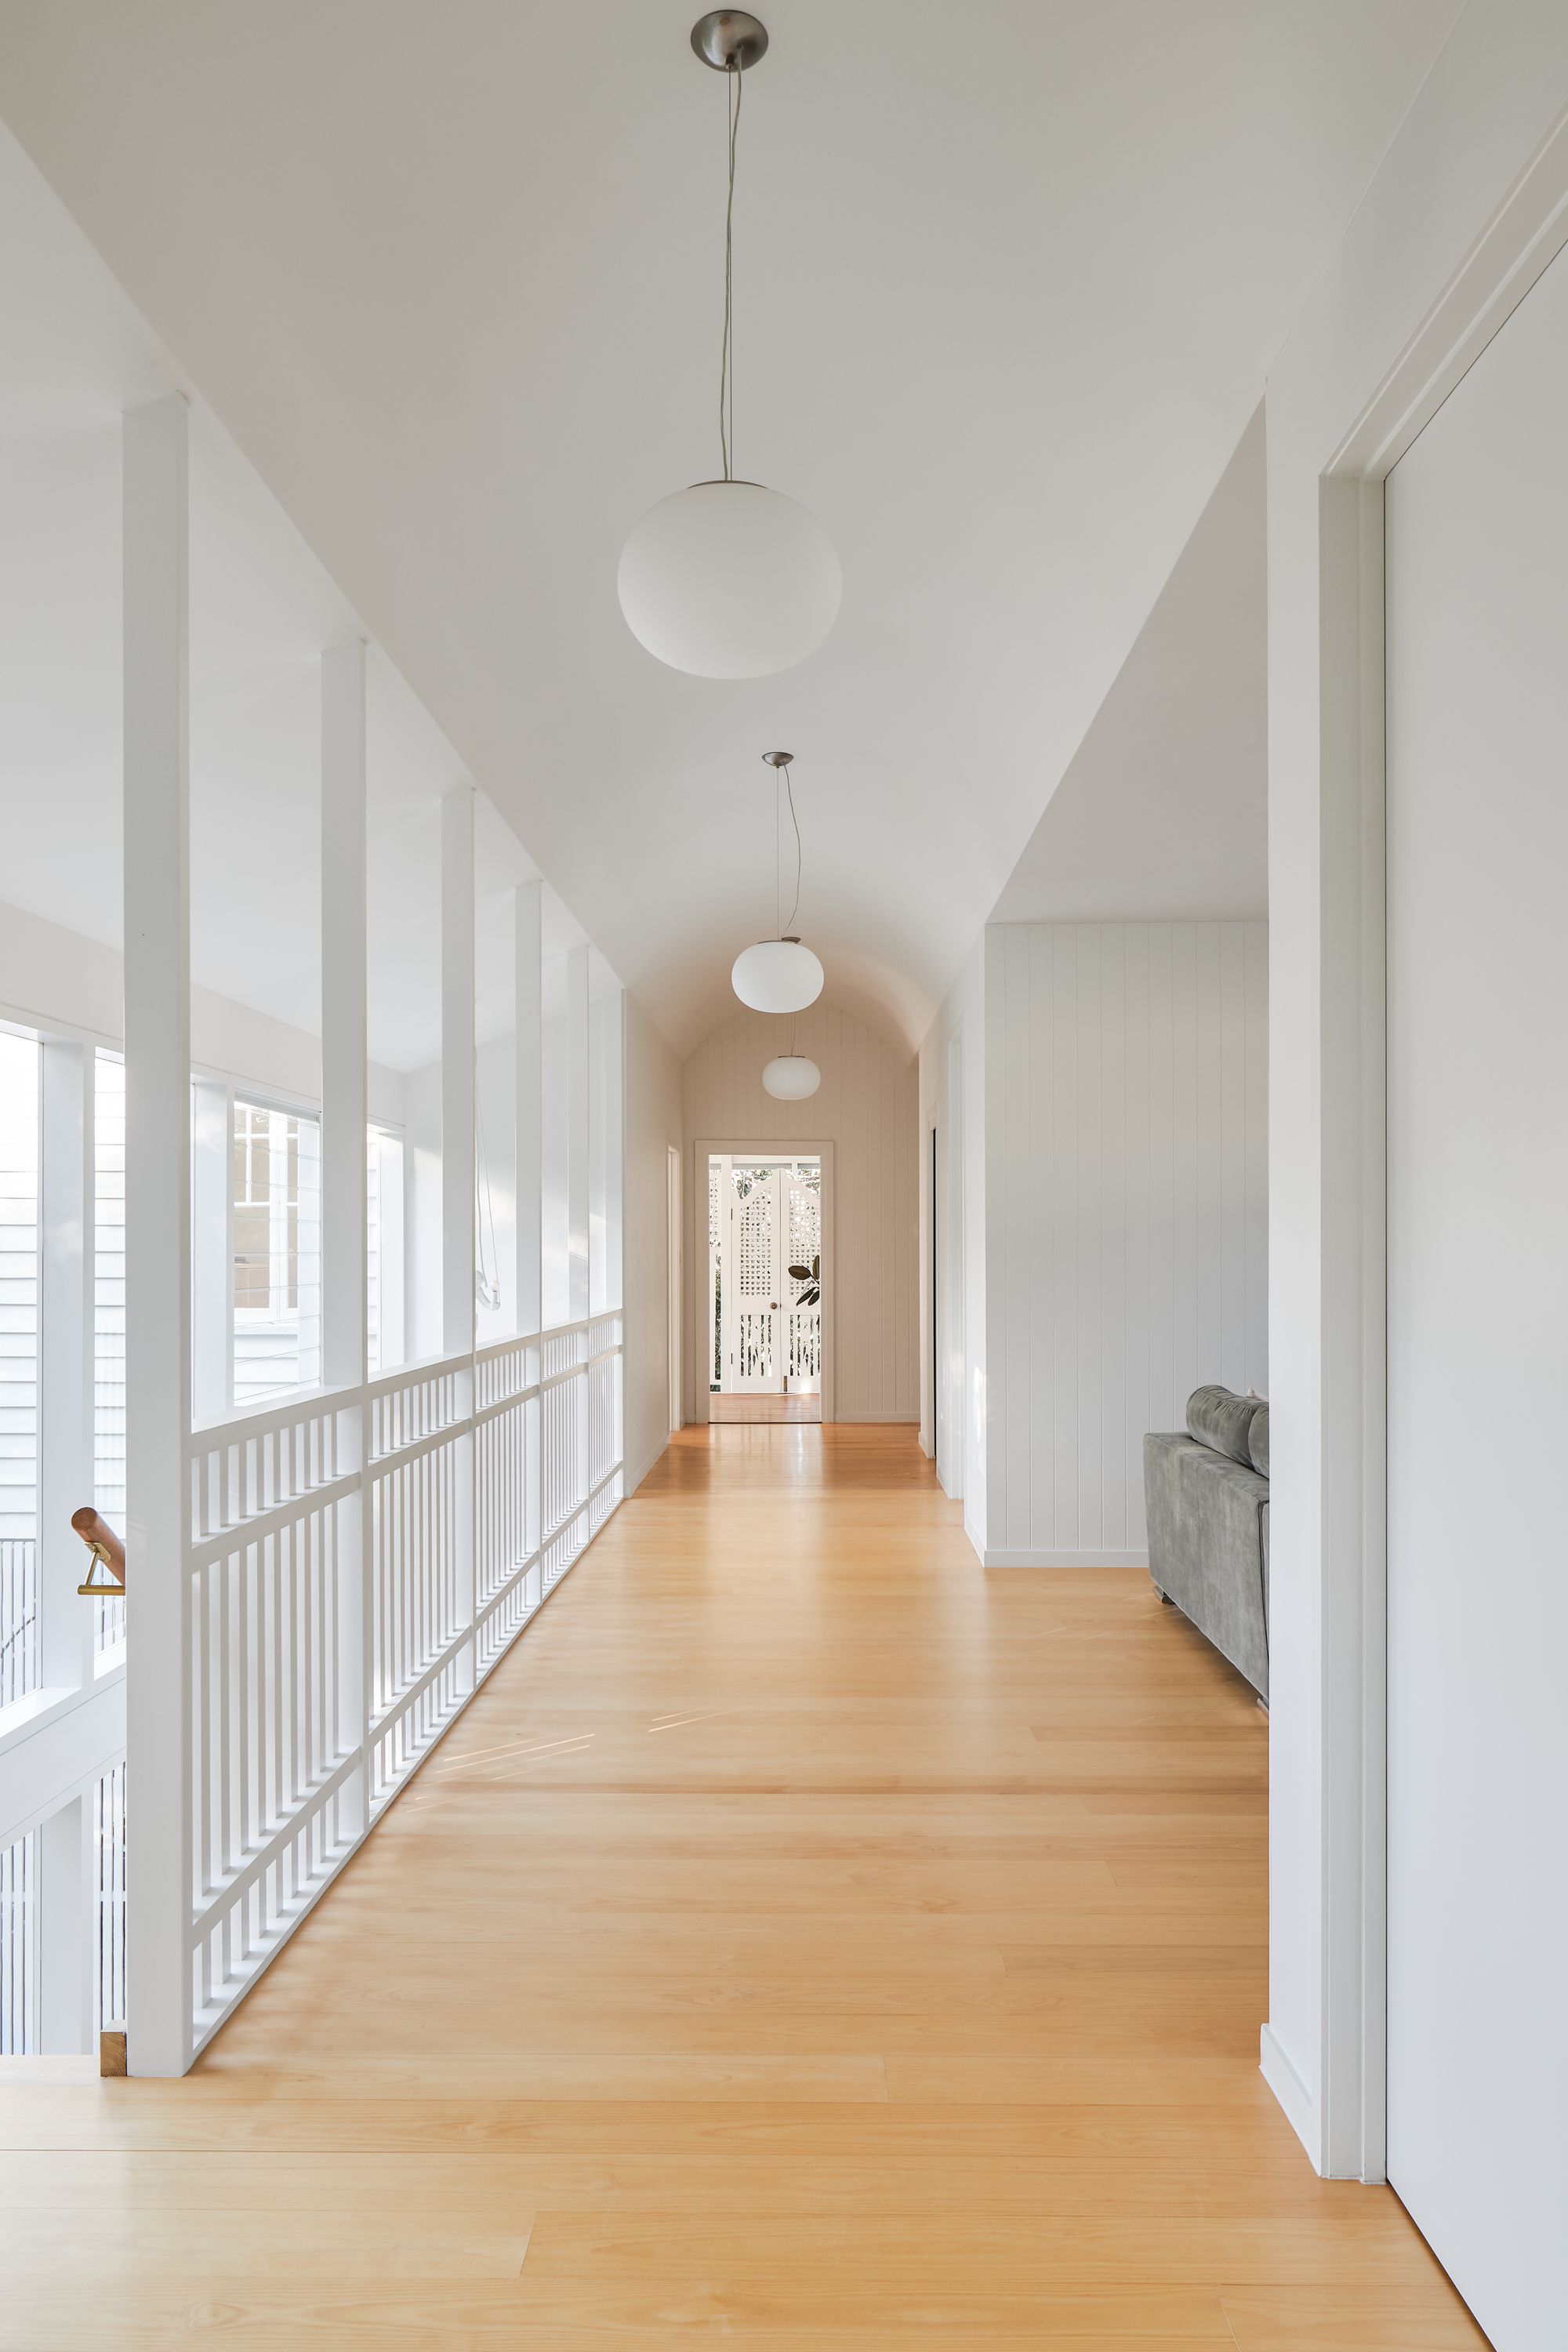 Fuller Street Cottage by DAH Architecture showing internal hallway with timber flooring and pendant lights